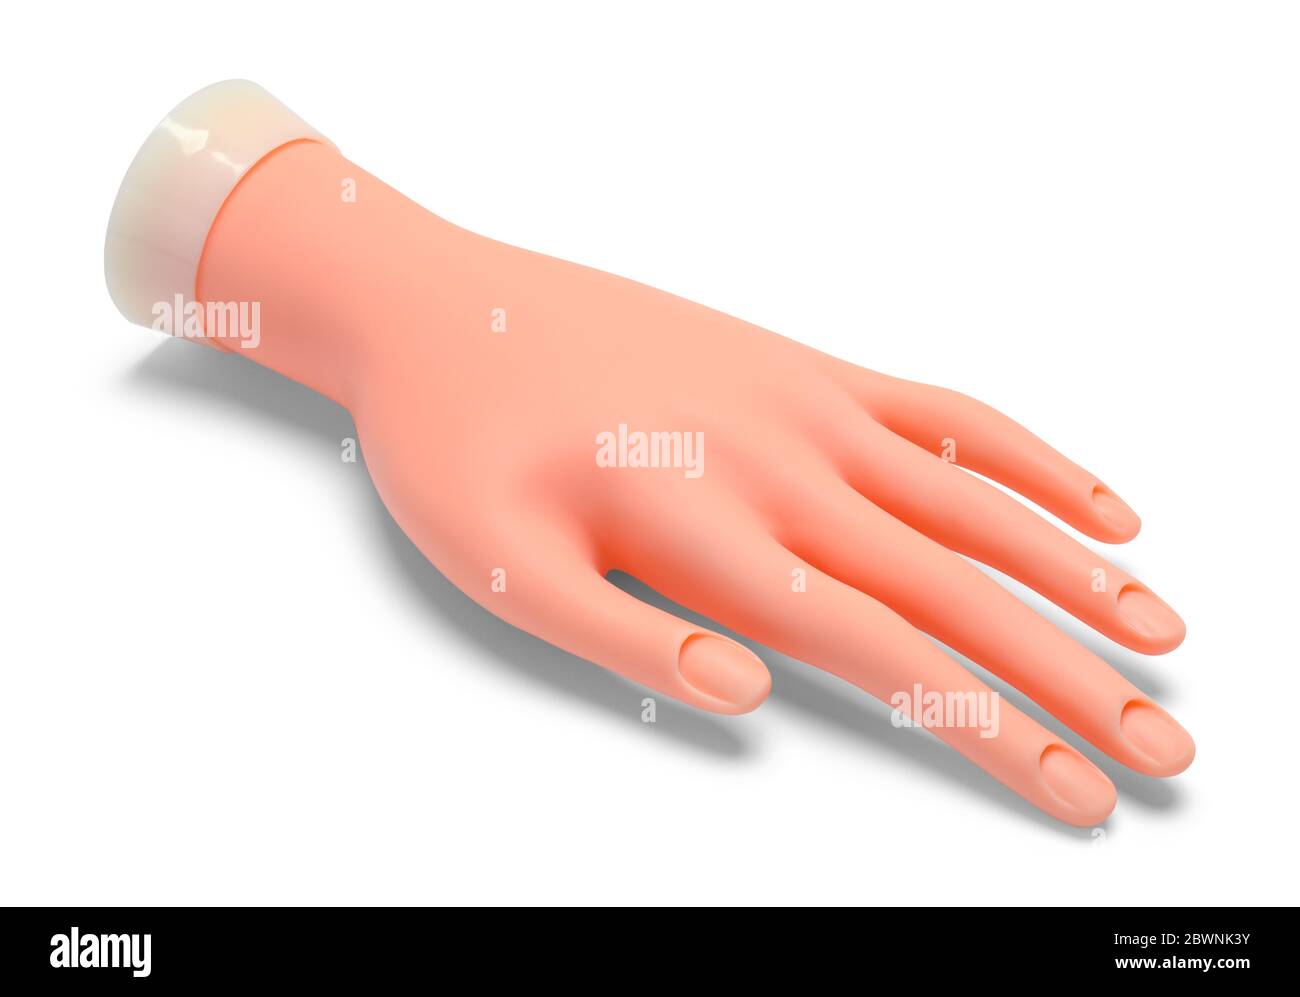 Rubber Mannequin Hand Isolated on White Background. Stock Photo